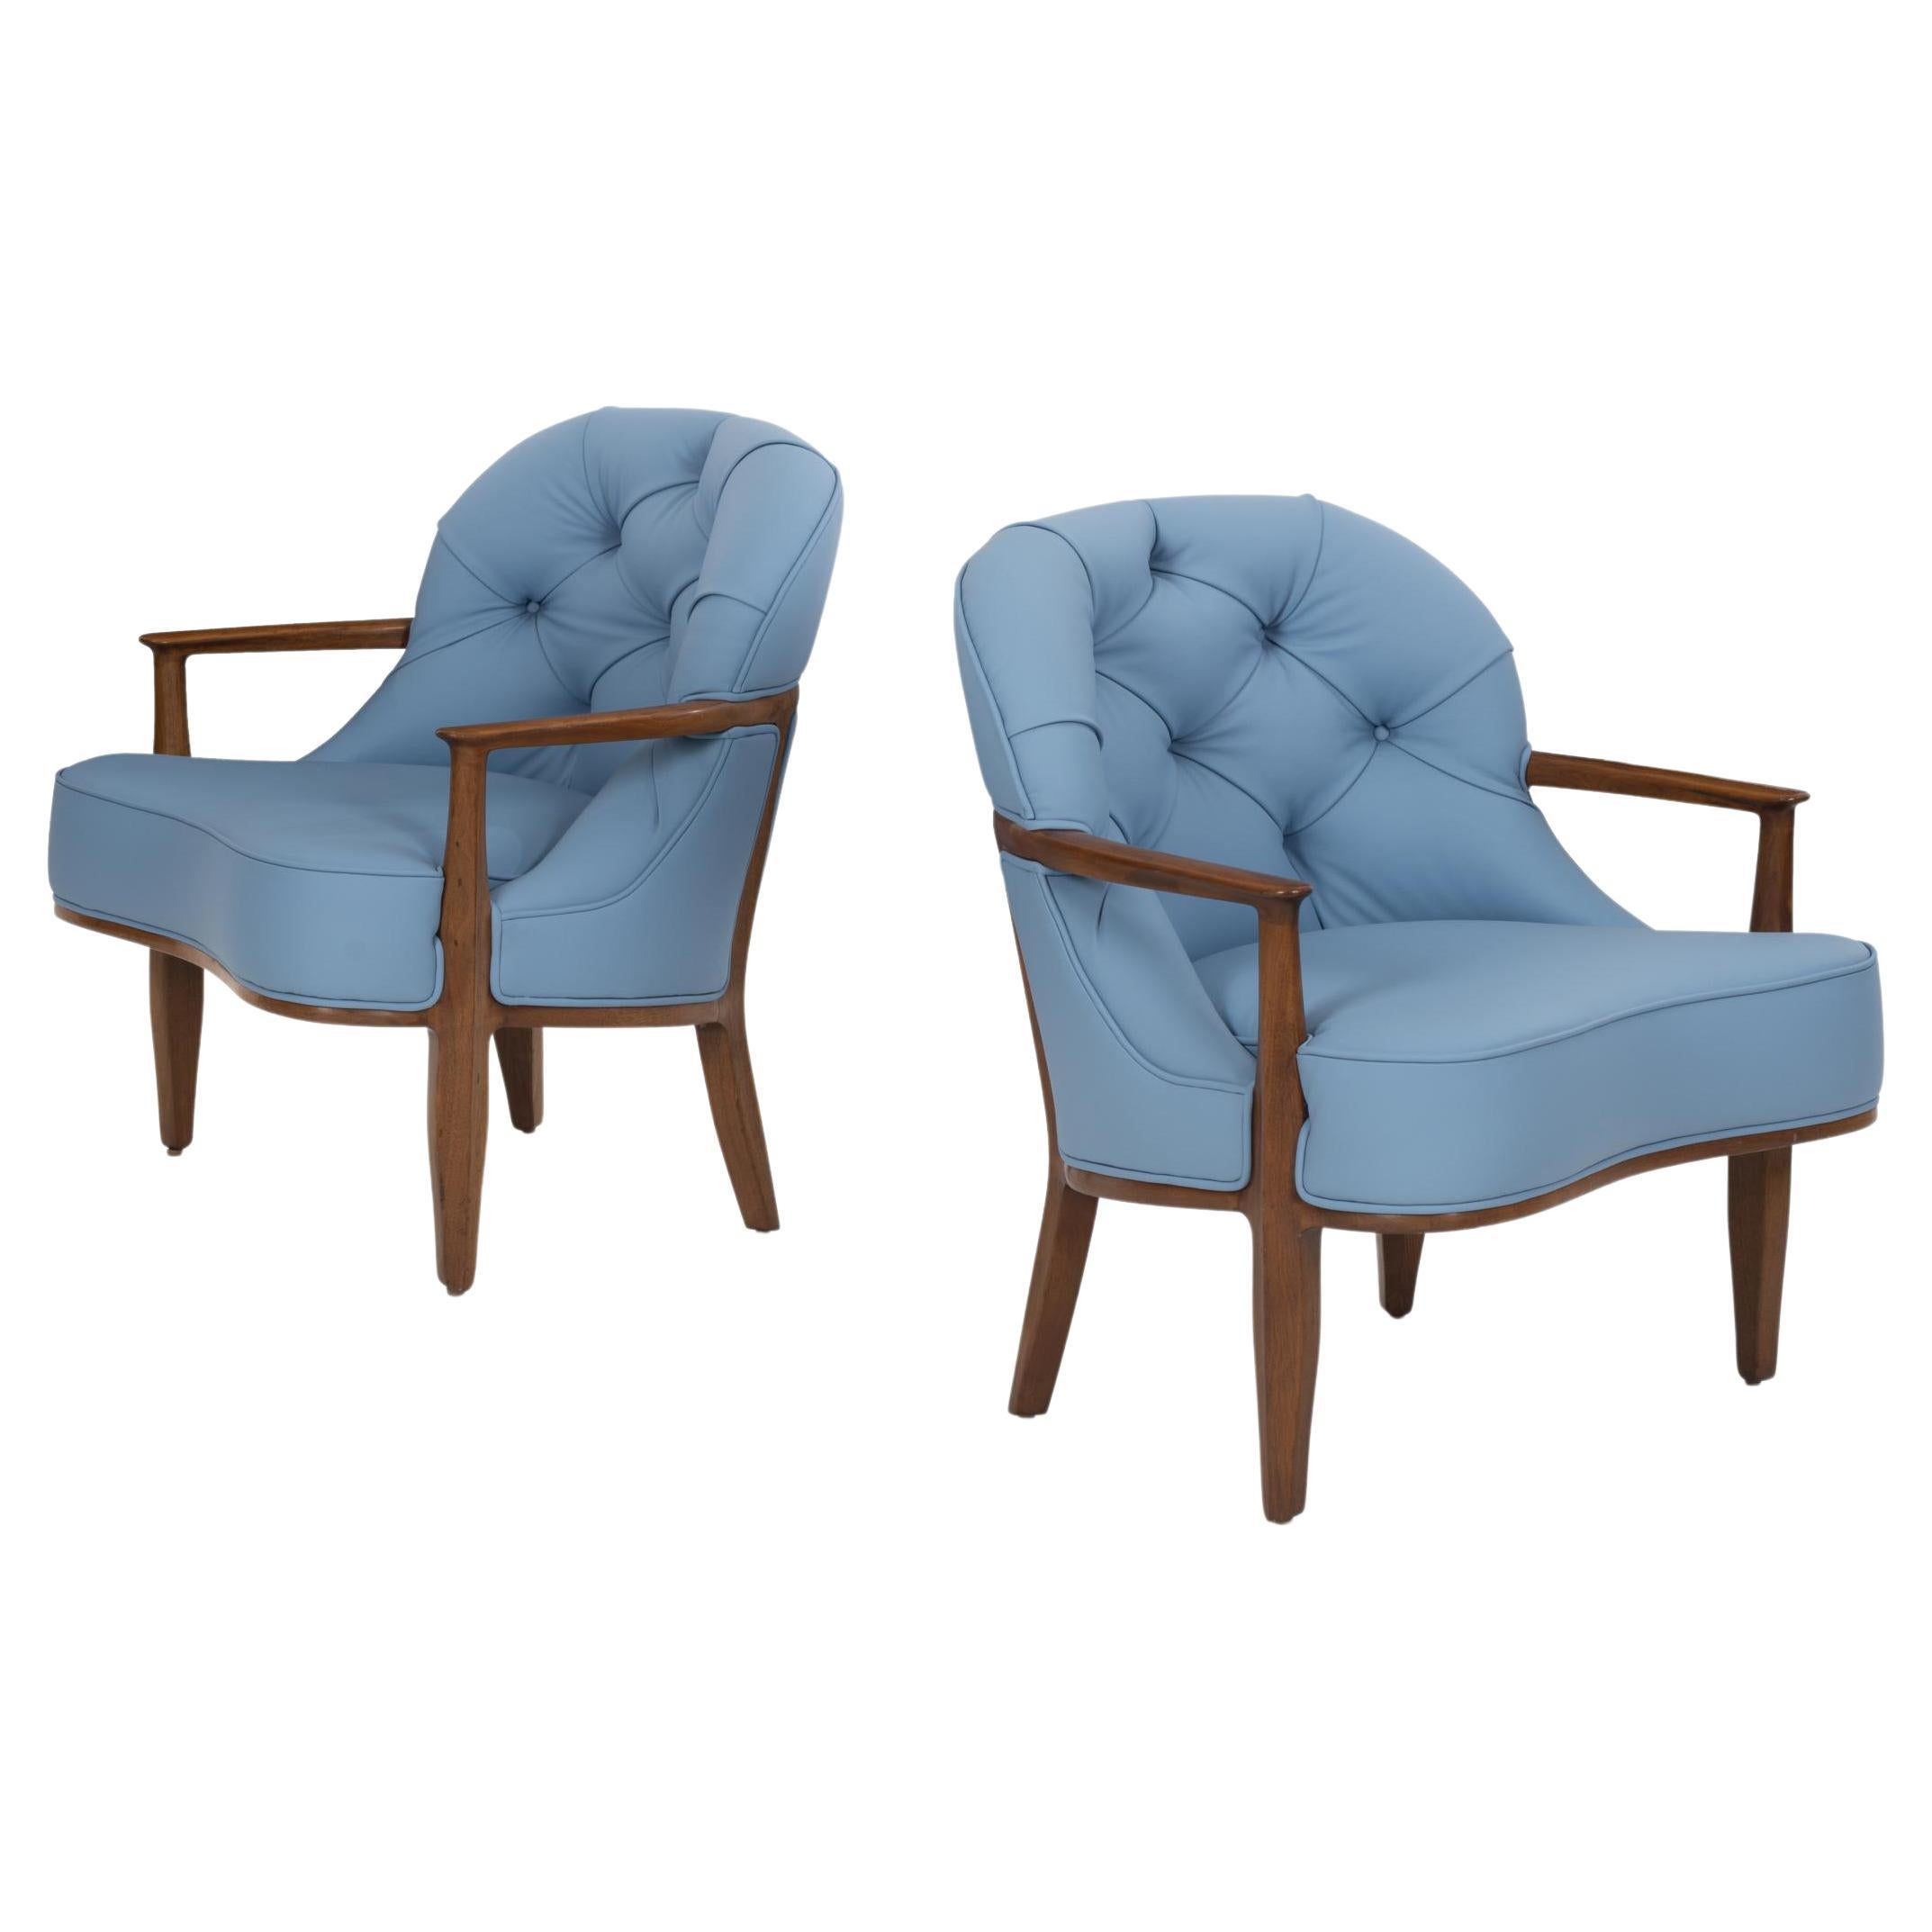 Pair of Edward Wormley Lounge Chairs for Dunbar Janus Collection